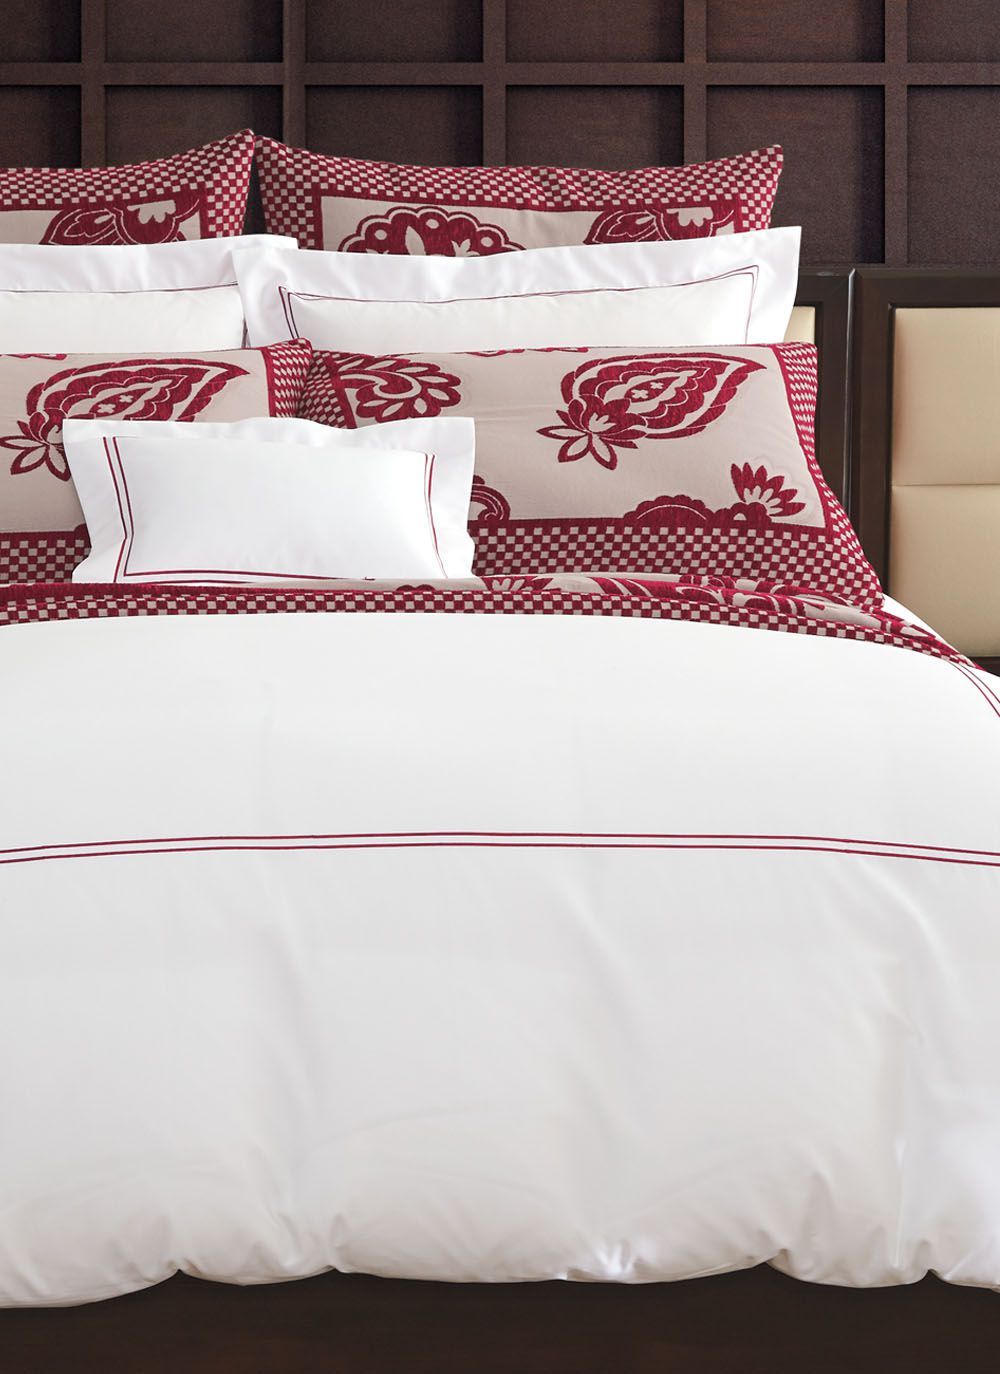 6 Best Duvet Covers Top Rated Comforter Covers For Your Bed